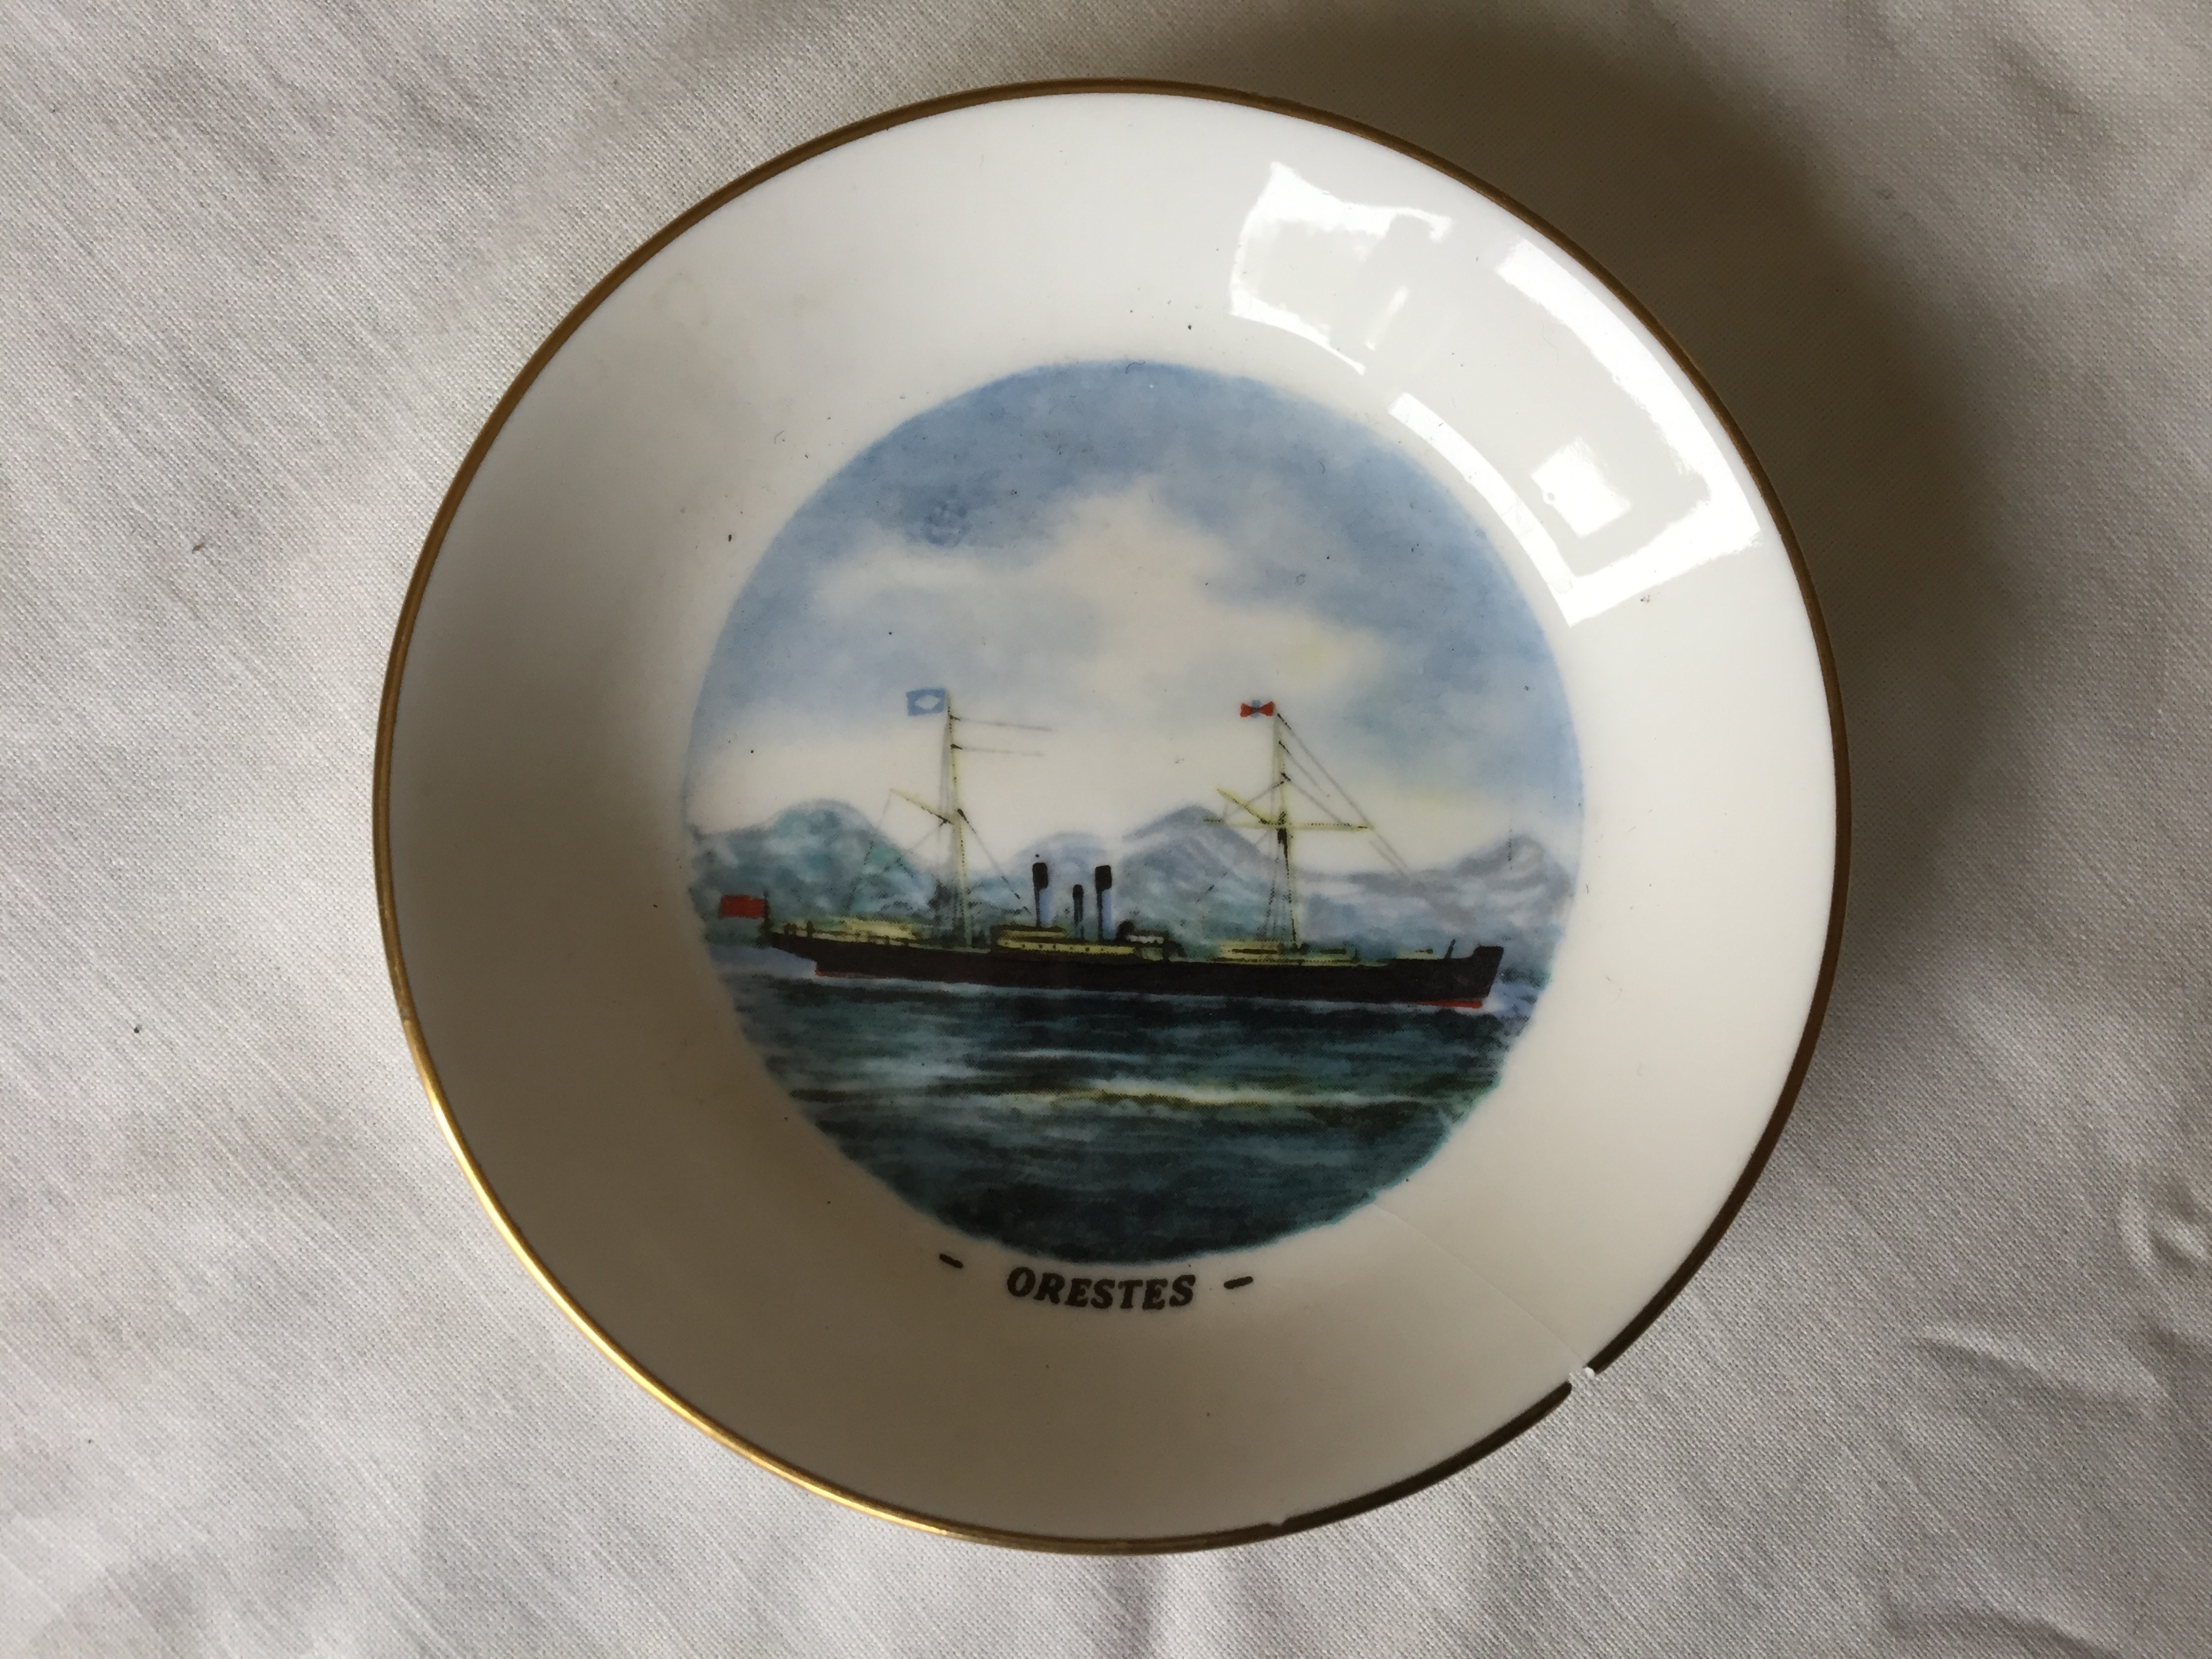 A SOUVENIR ROYAL WORCESTER DISH FROM THE BLUE FUNNEL LINE VESSEL THE ORESTES